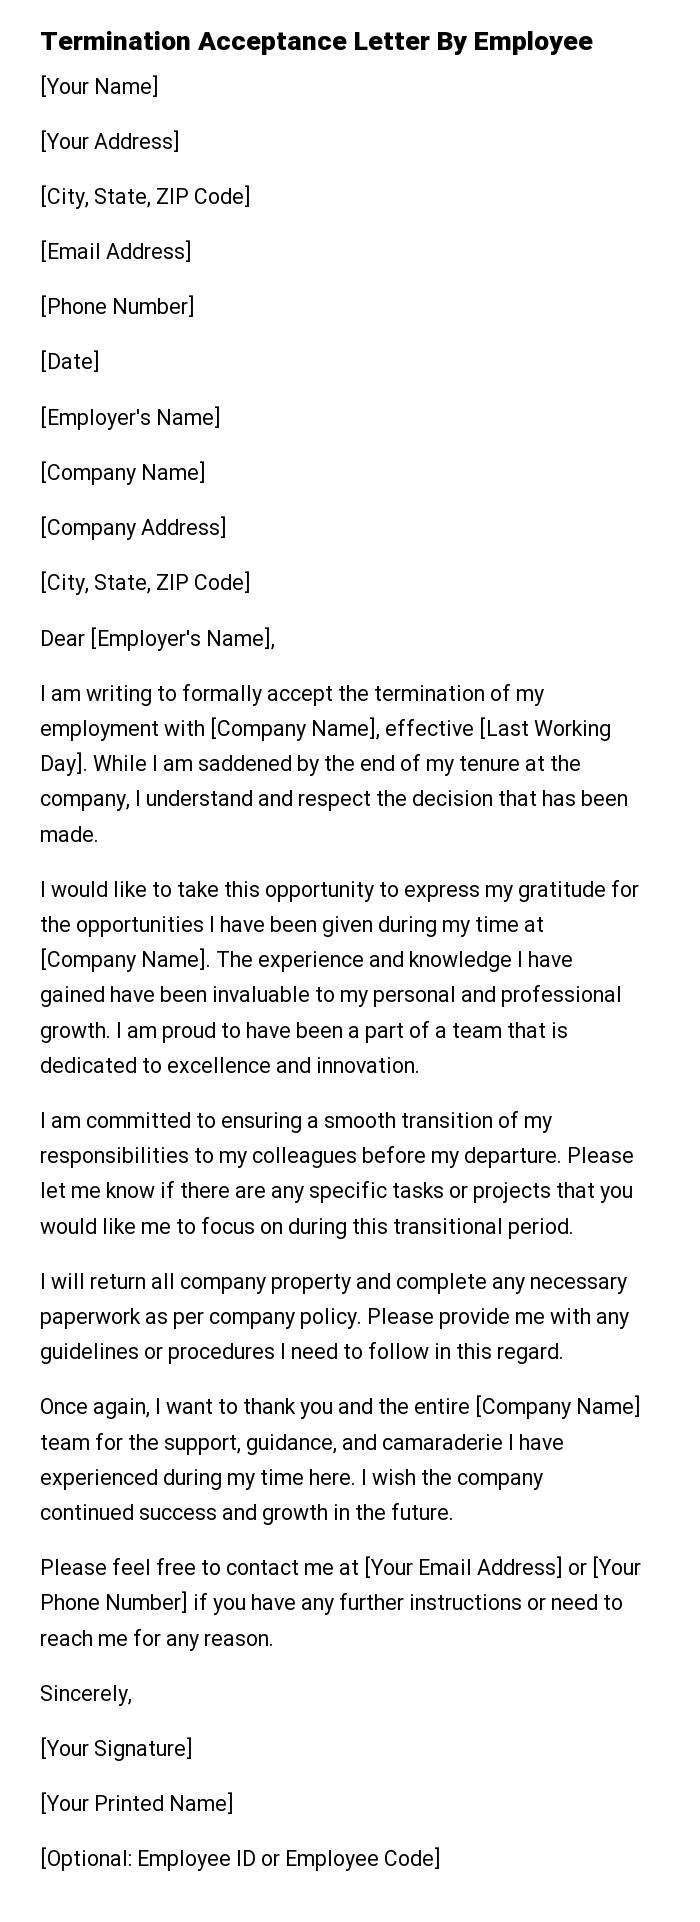 Termination Acceptance Letter By Employee